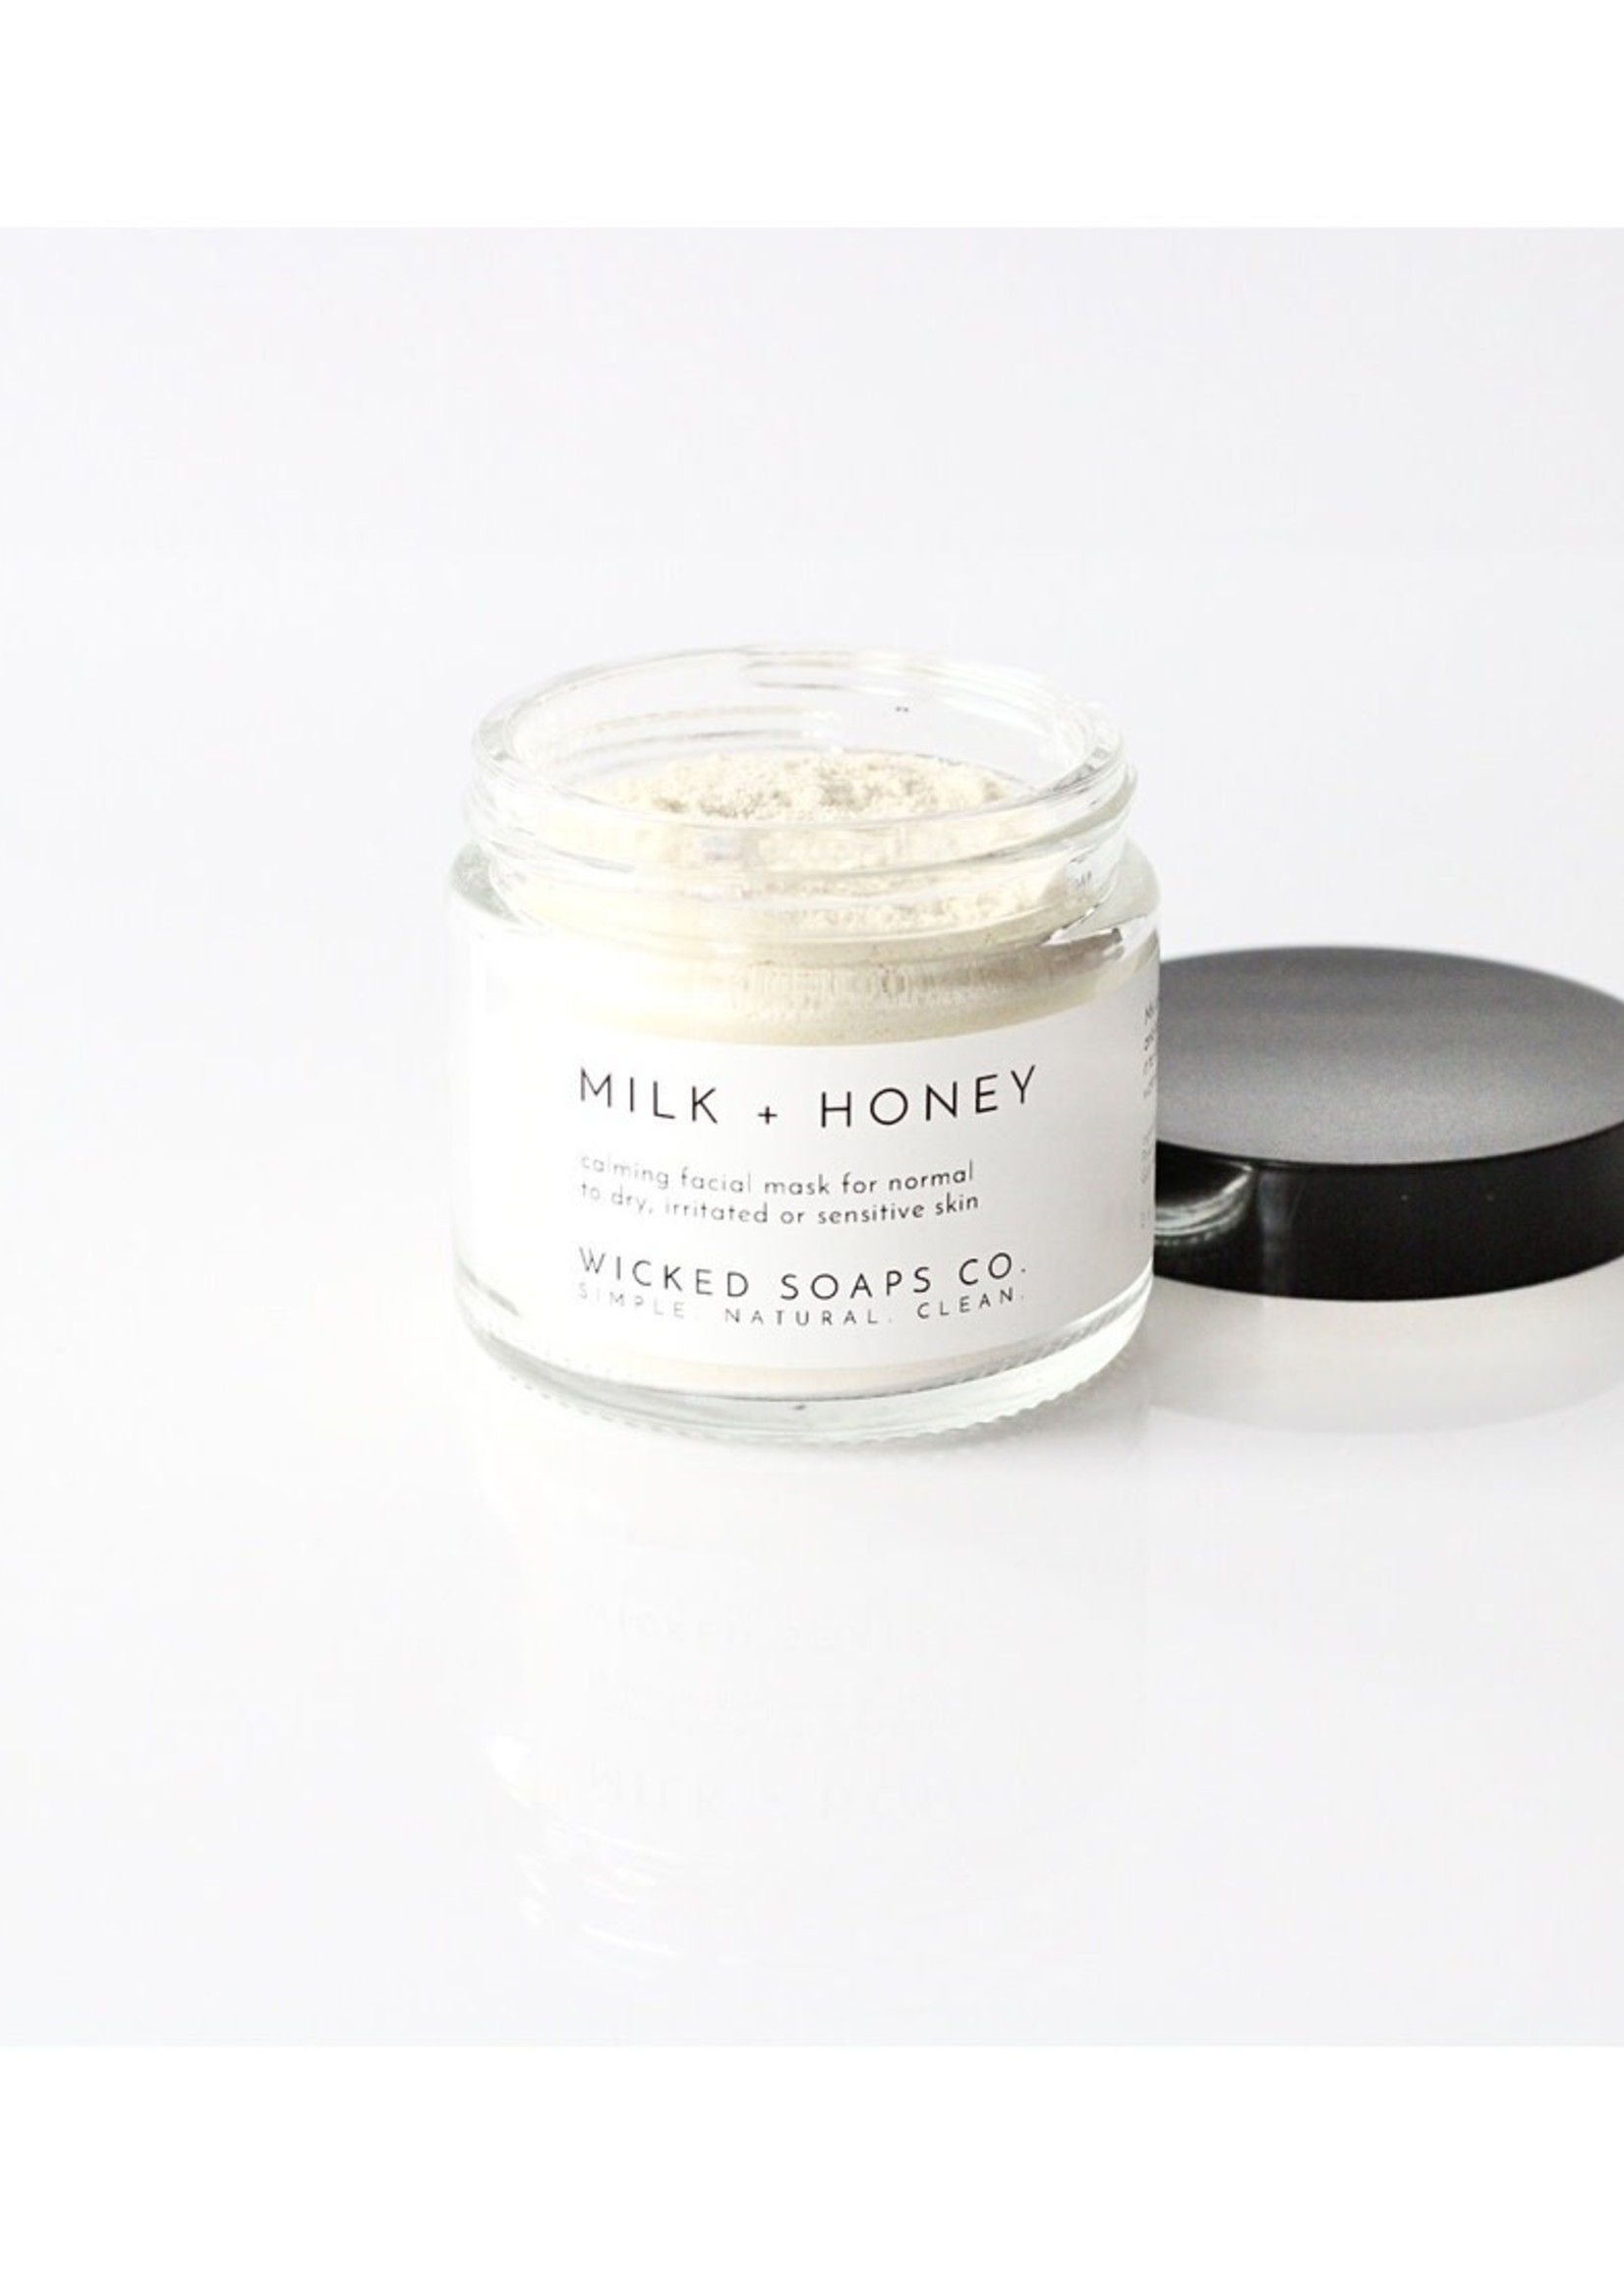 Wicked Soaps Co. Milk + Honey Facial Mask